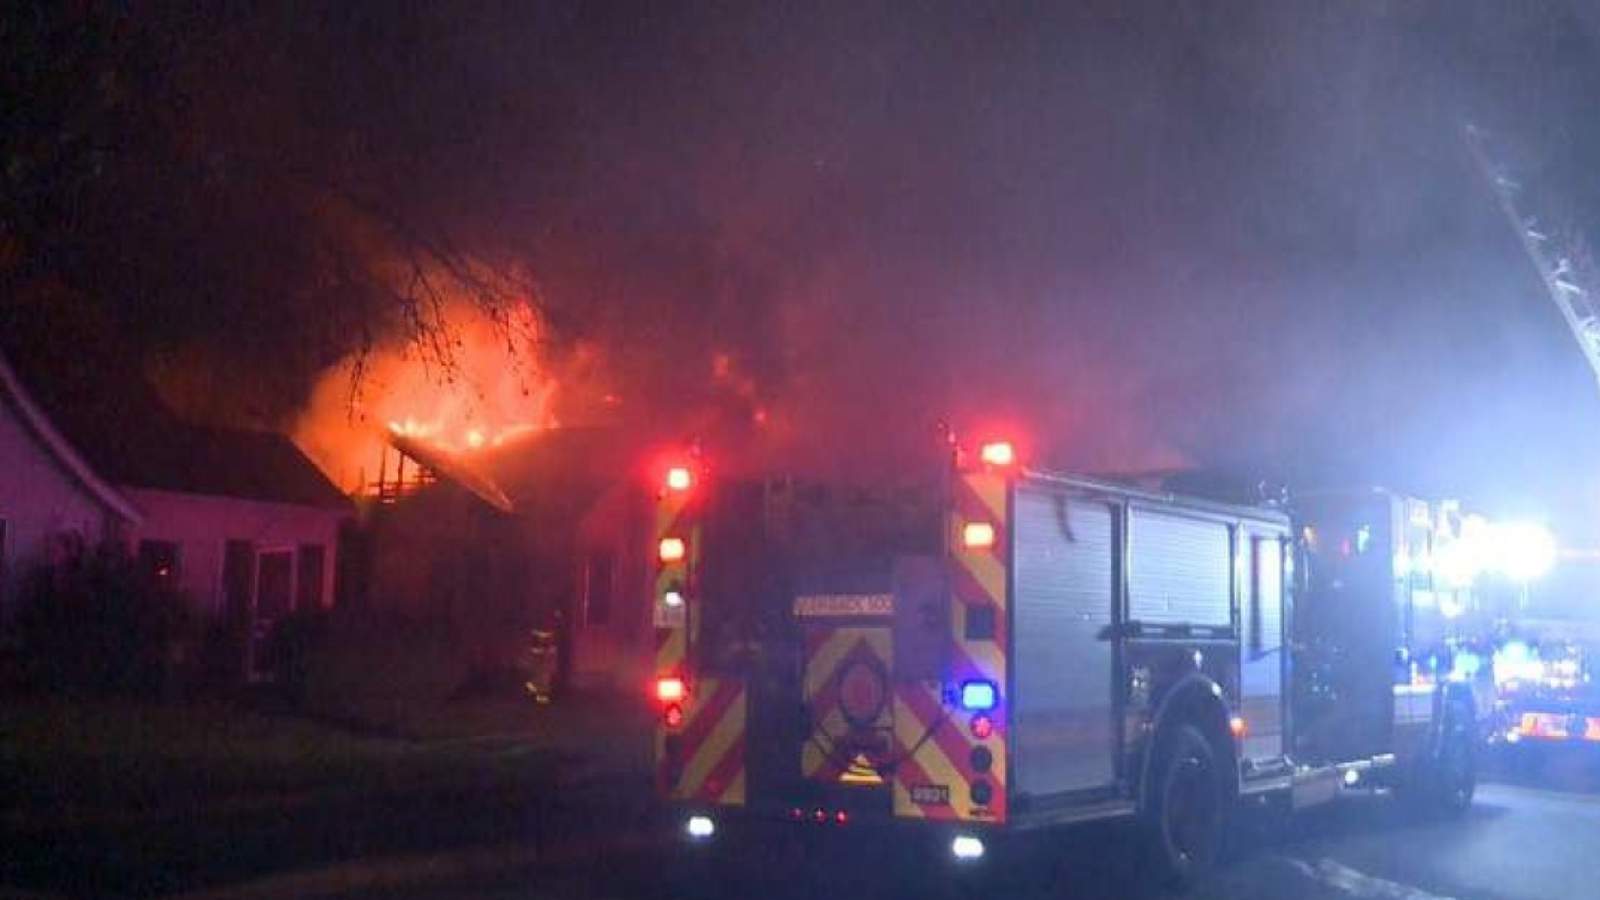 Firefighters scramble to protect neighboring homes from fast-spreading flames